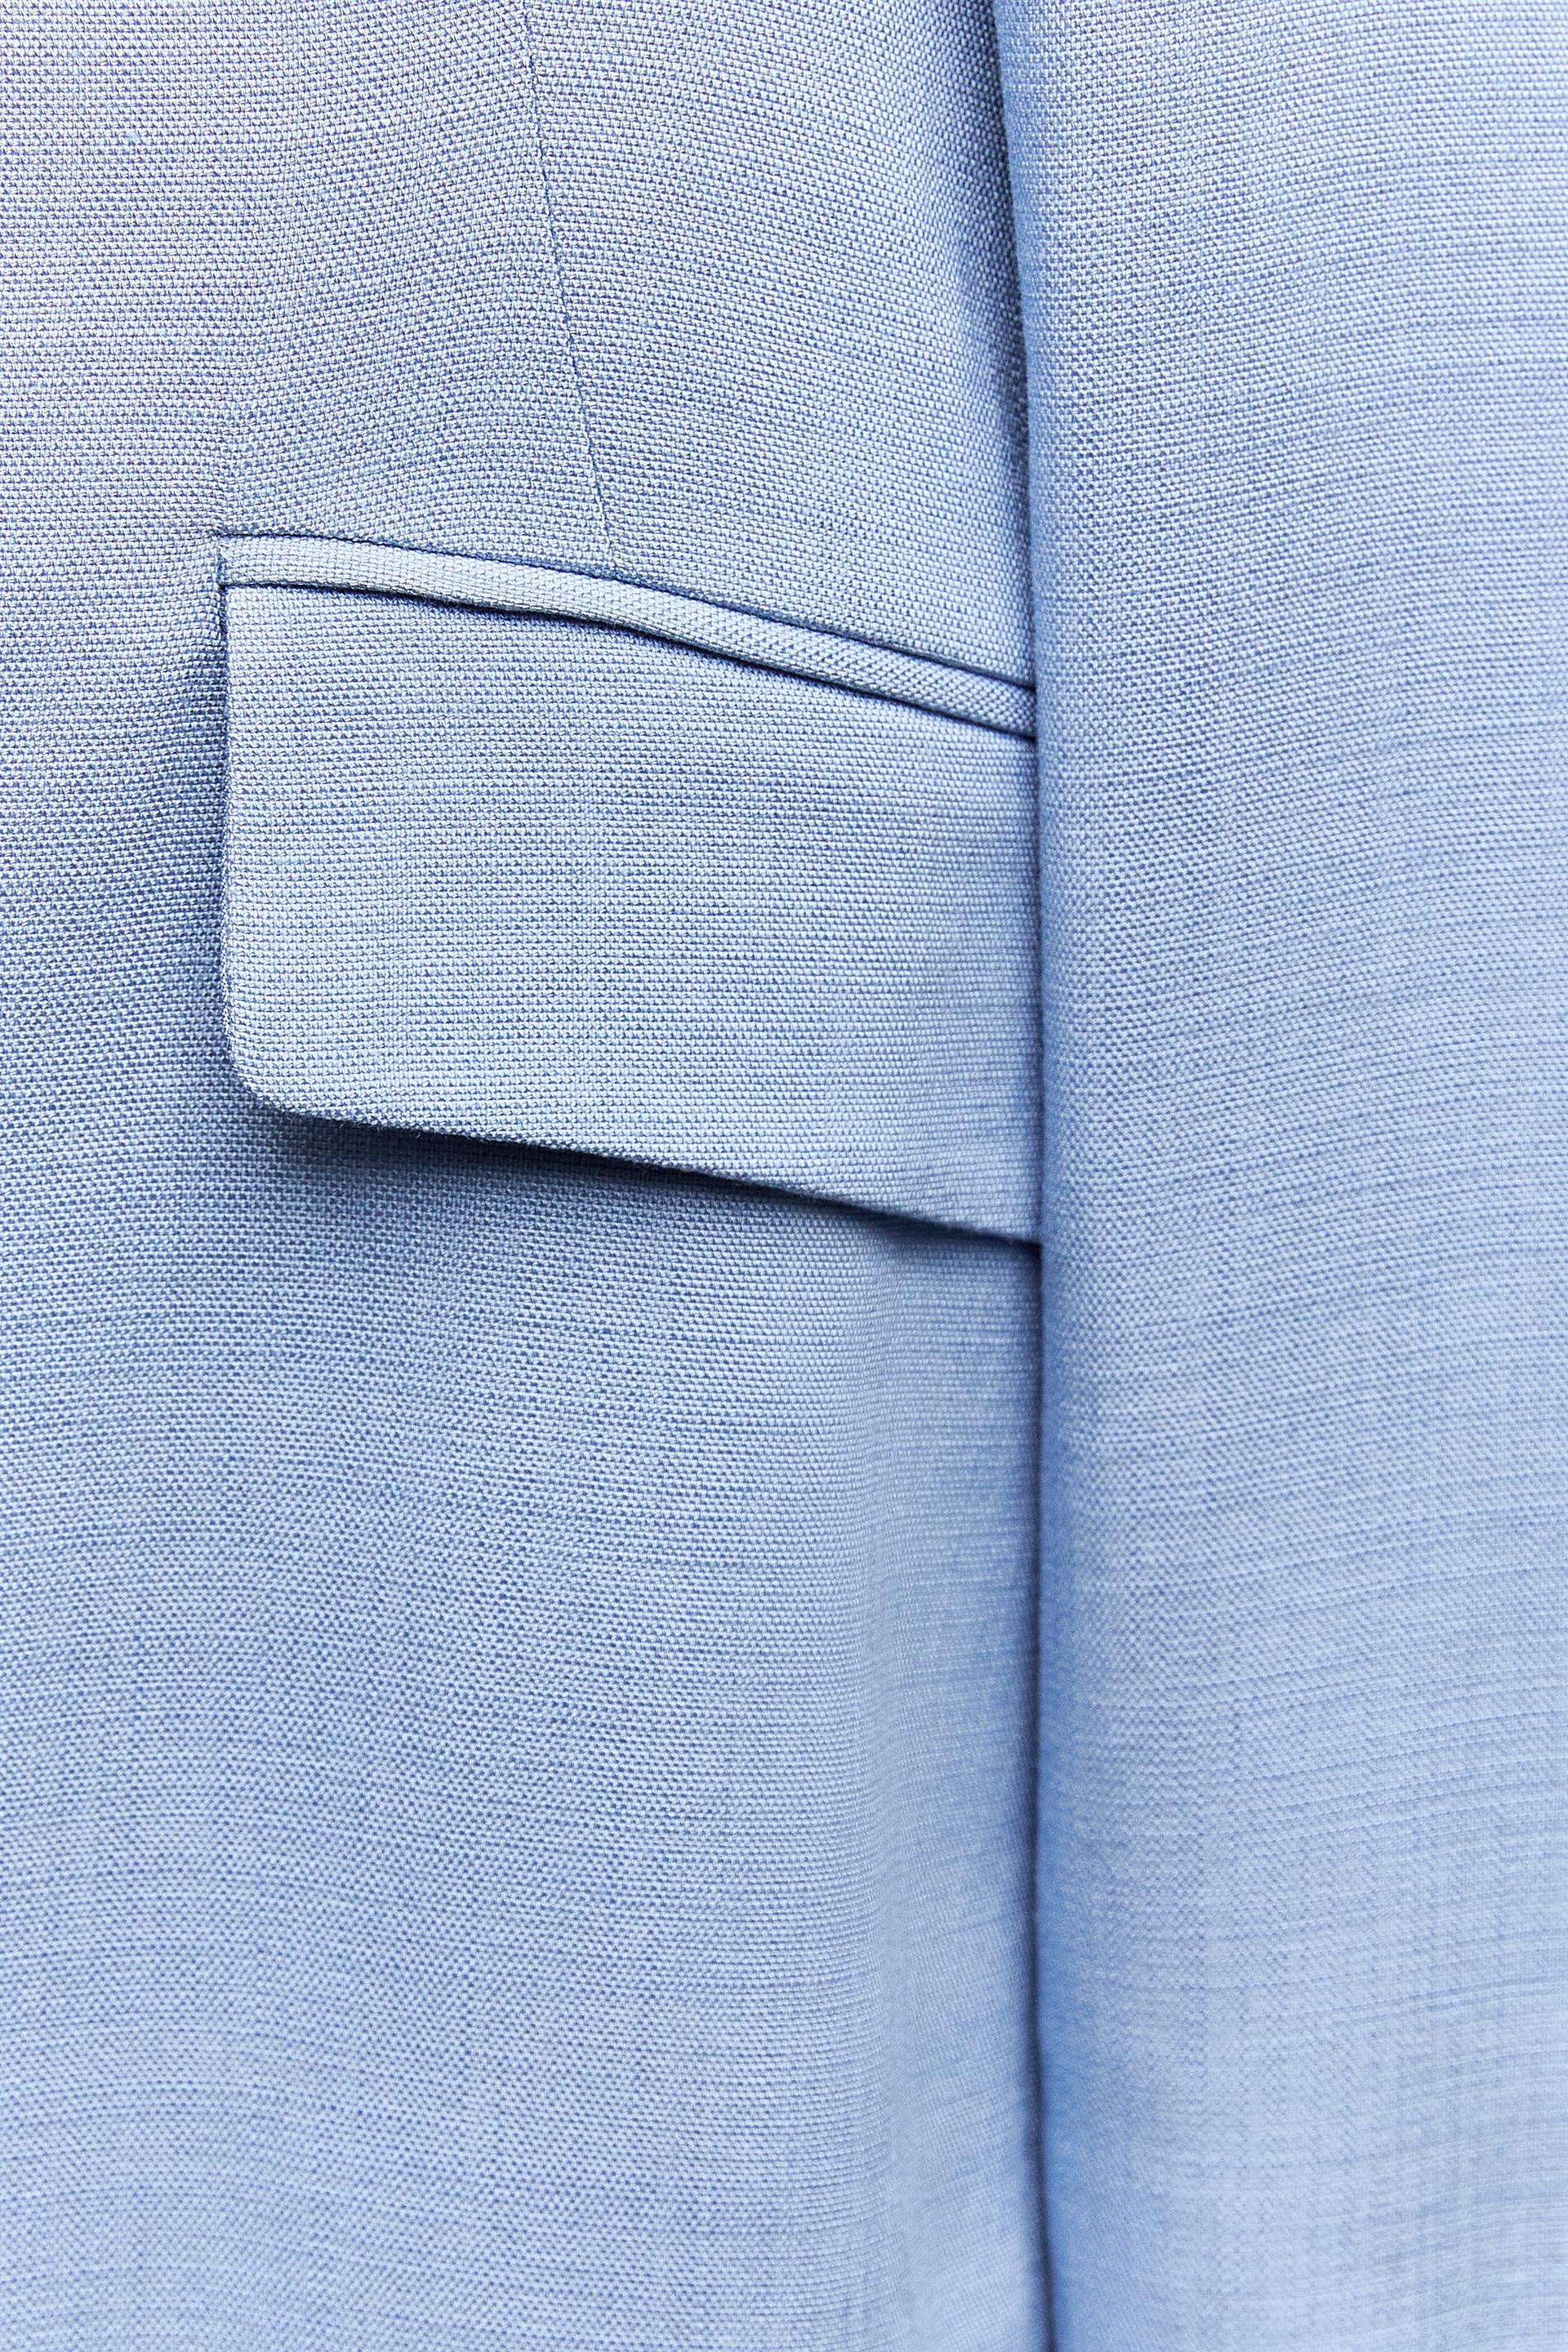 ZW COLLECTION FITTED BUTTONED BLAZER - Light blue